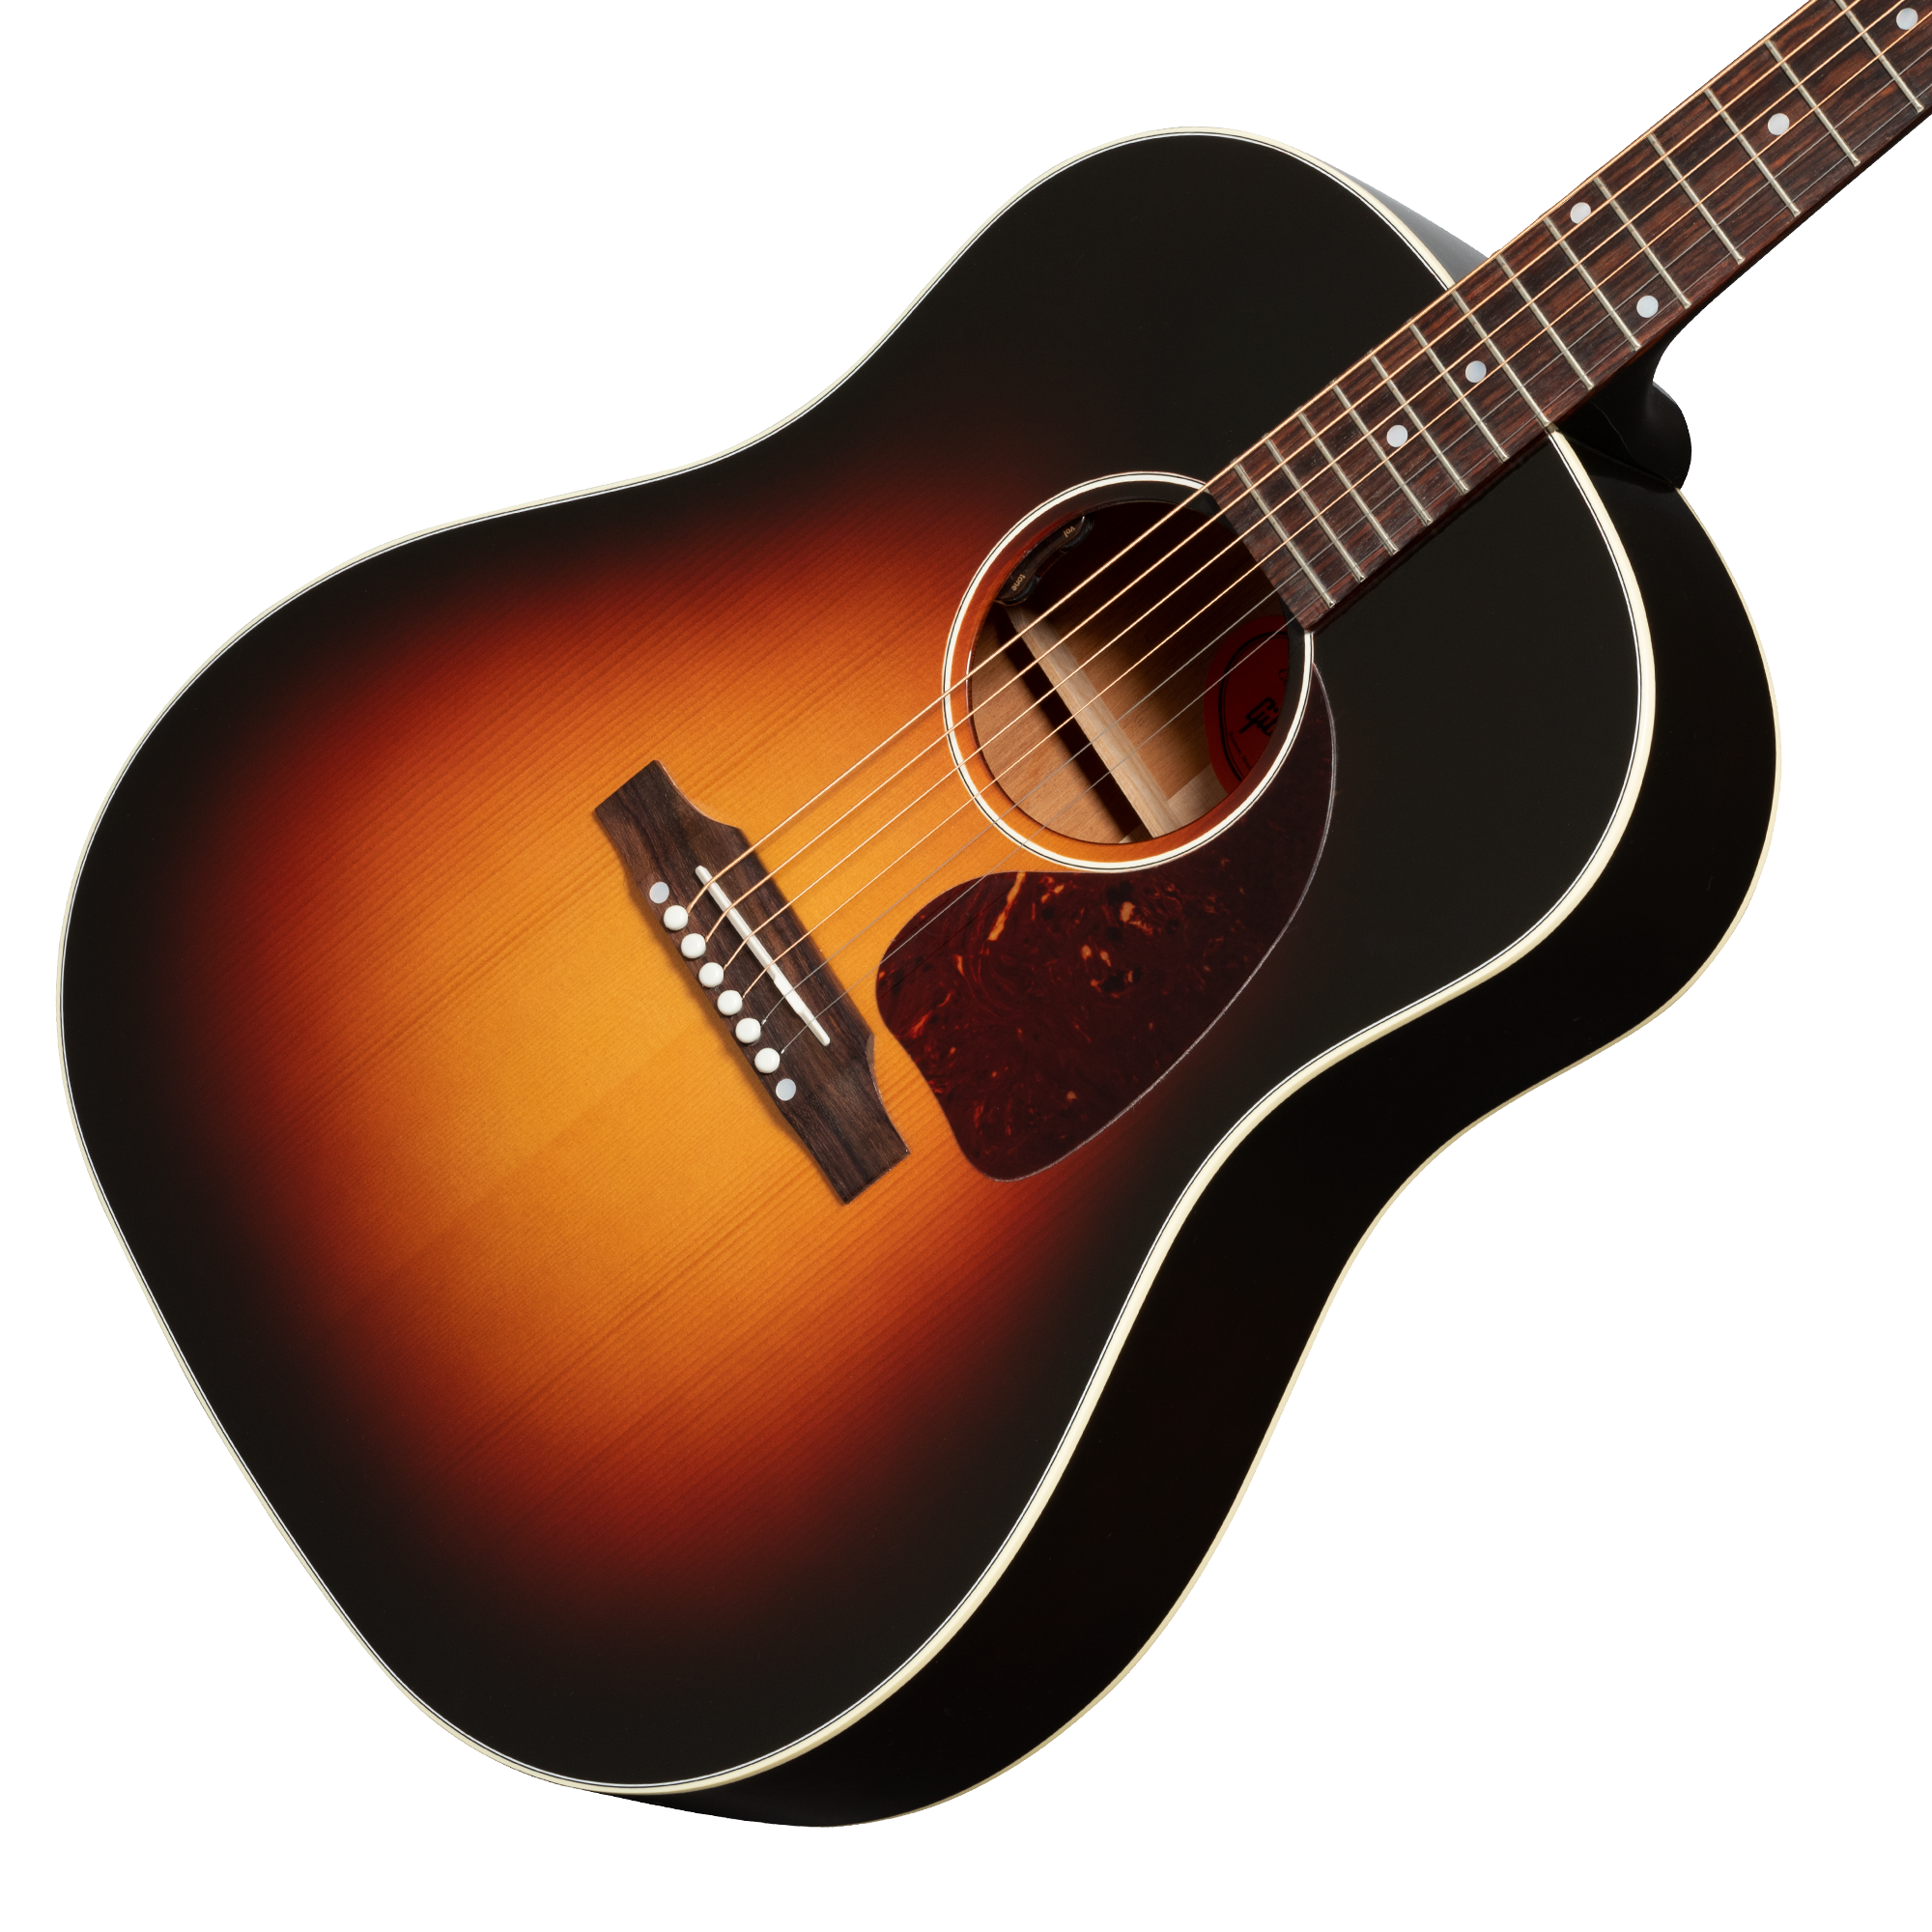 J-45 Standard, Red Spruce | Gibson